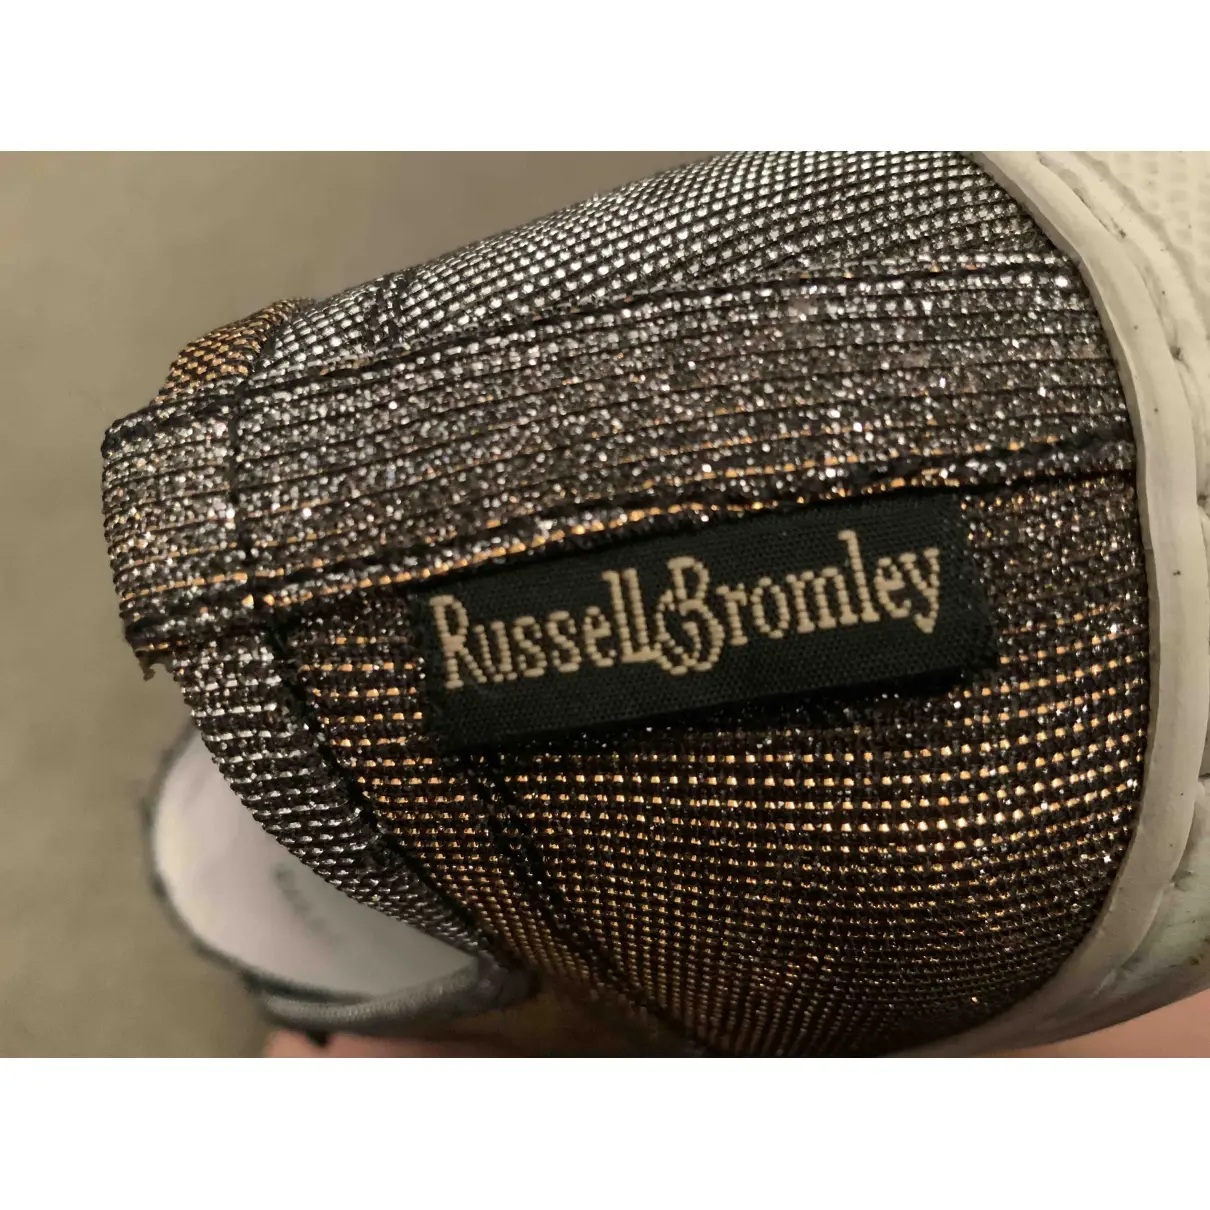 Buy Russell & Bromley Glitter trainers online